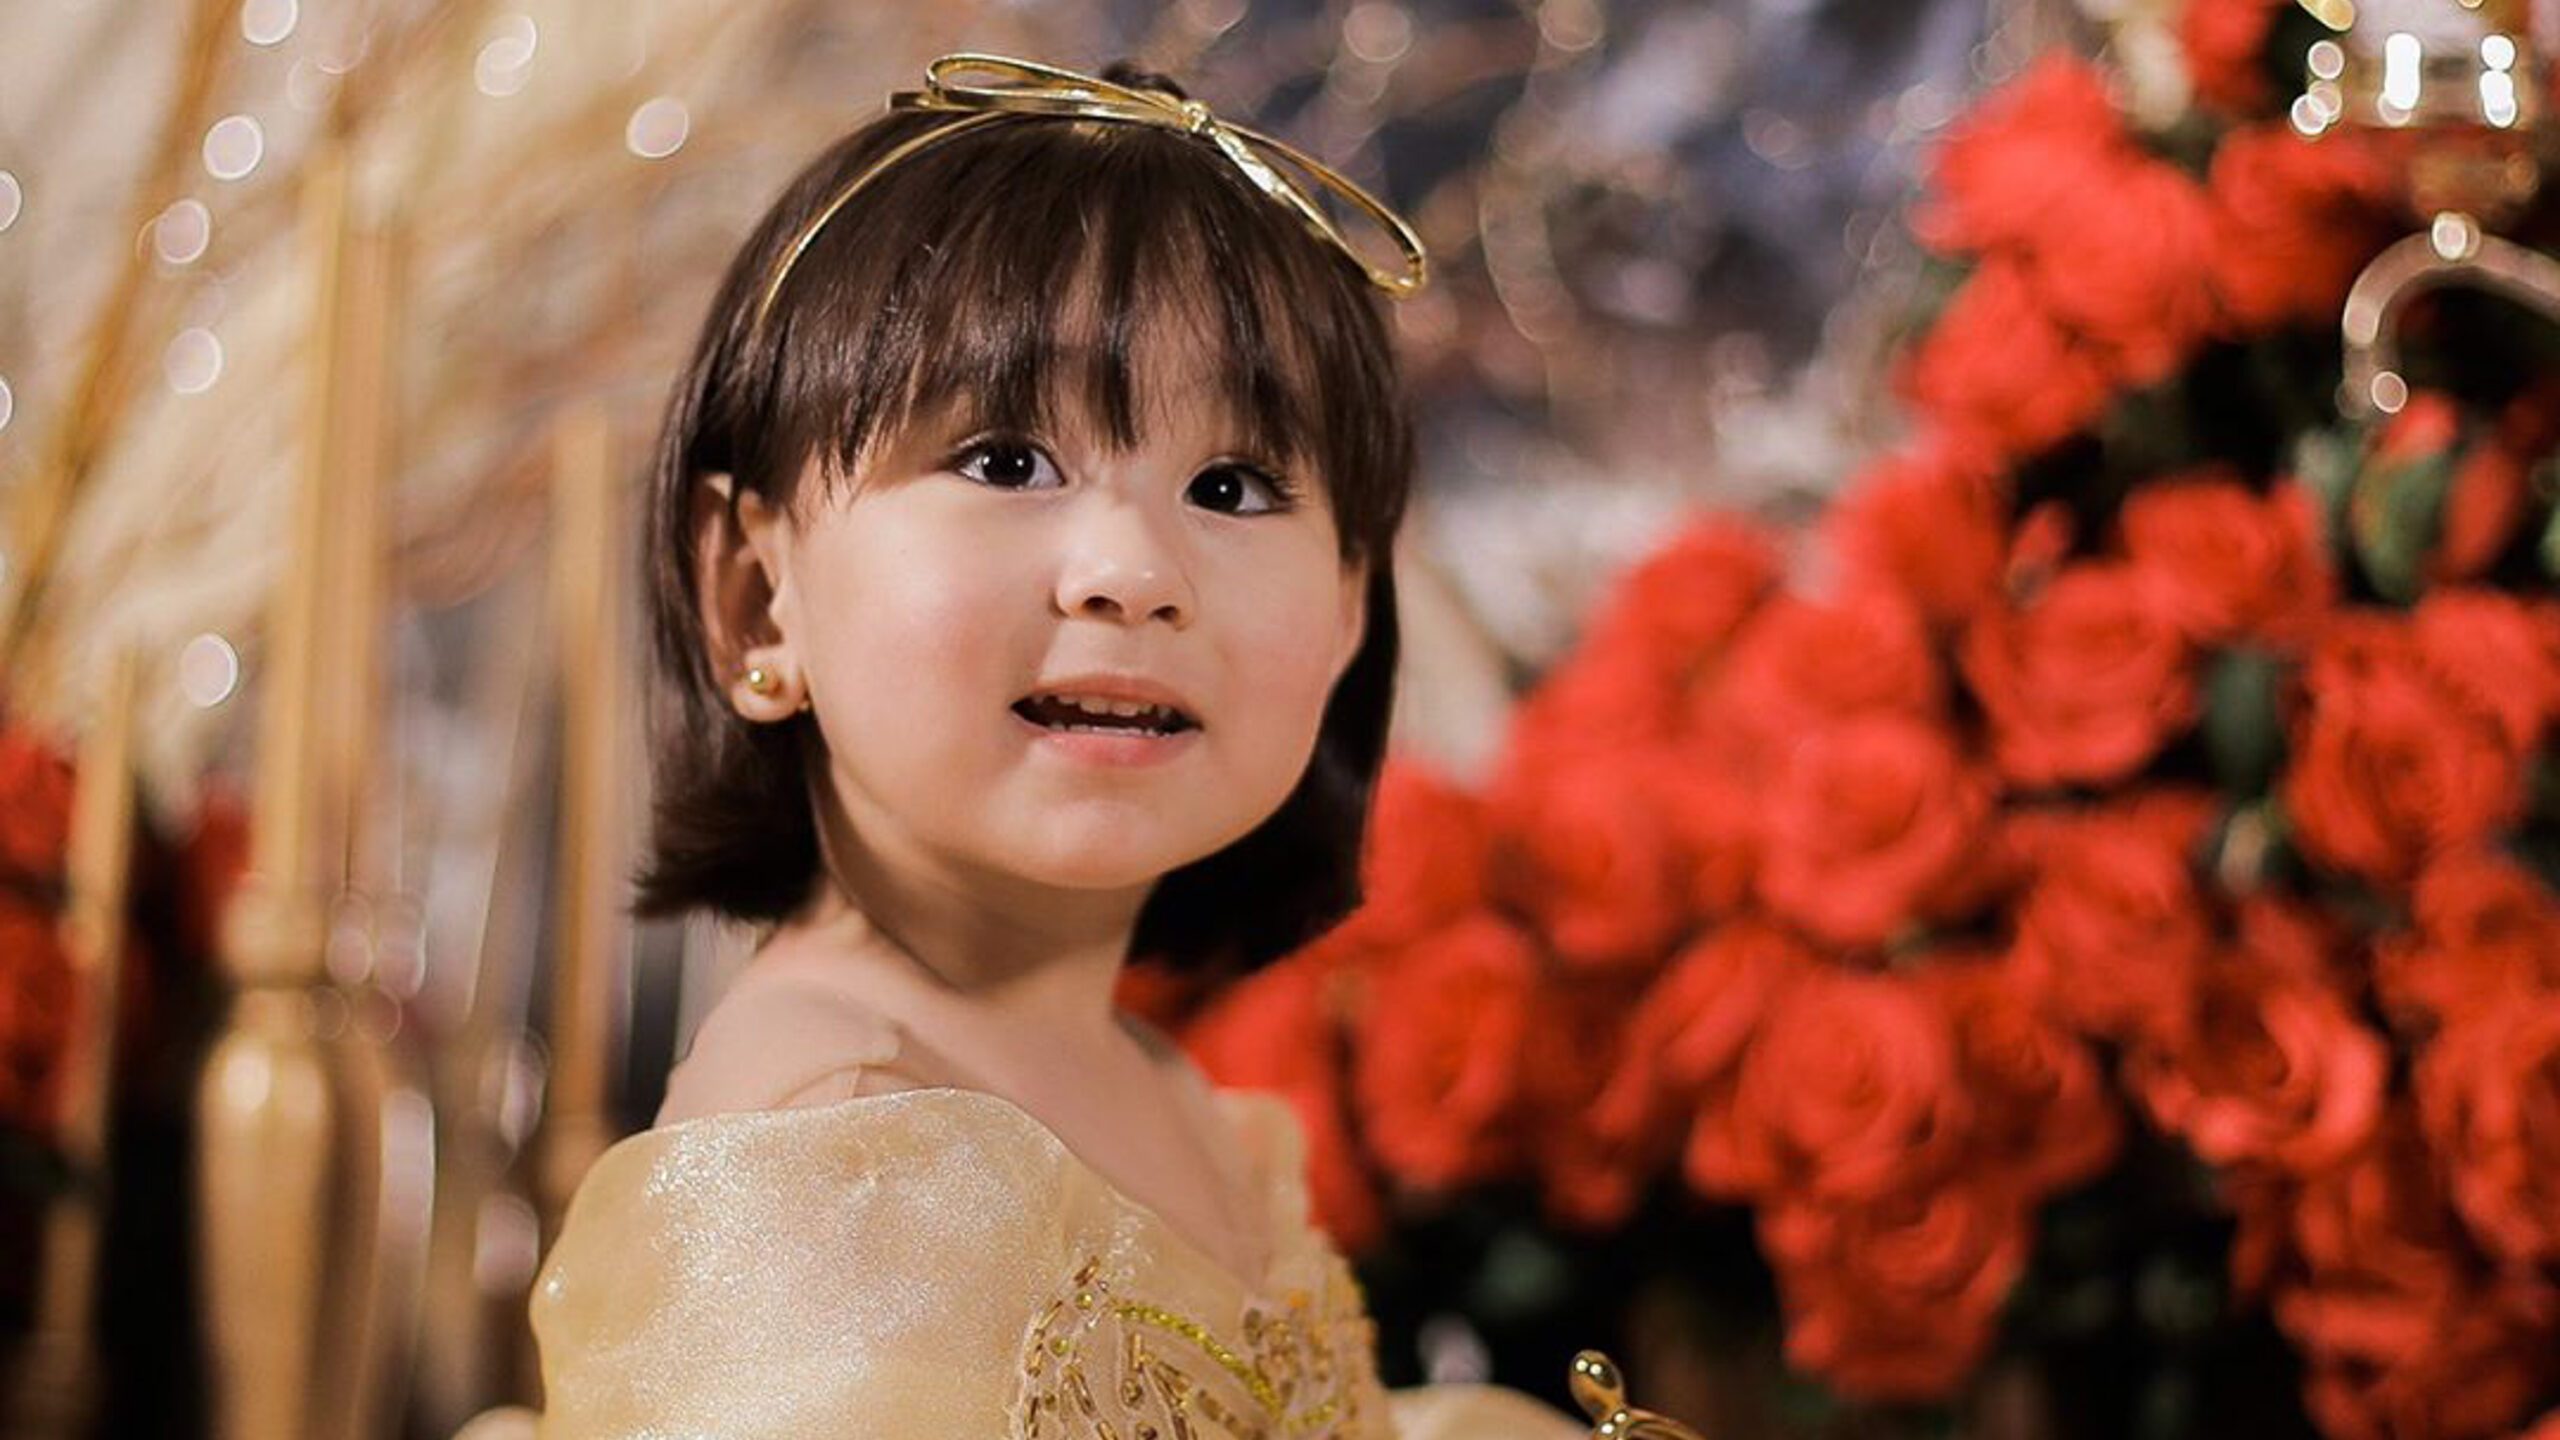 LOOK: Scarlet Snow Belo dresses up as Belle from ‘Beauty and the Beast’